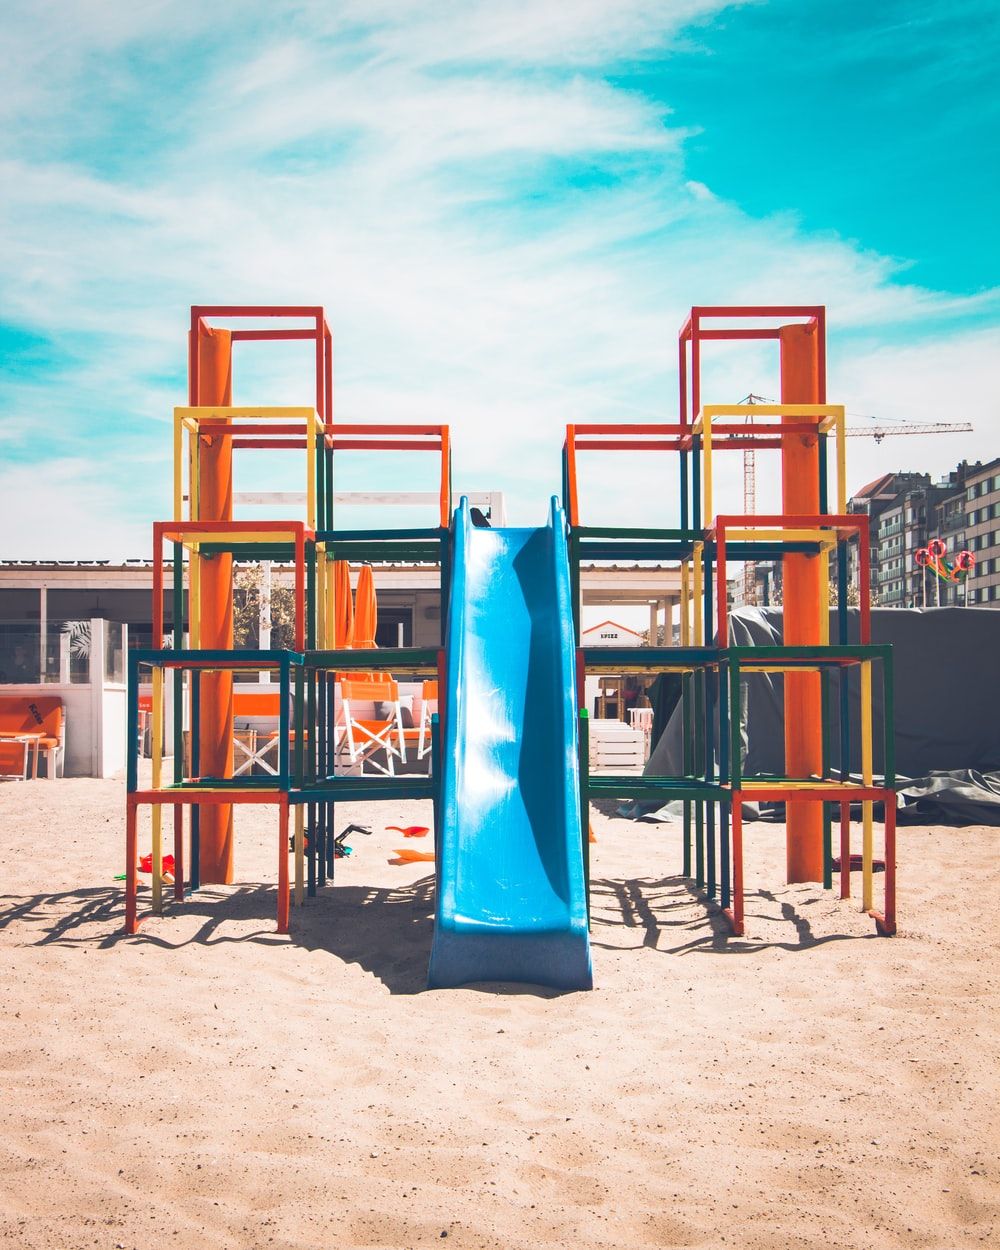 Playgrounds Picture. Download Free Image